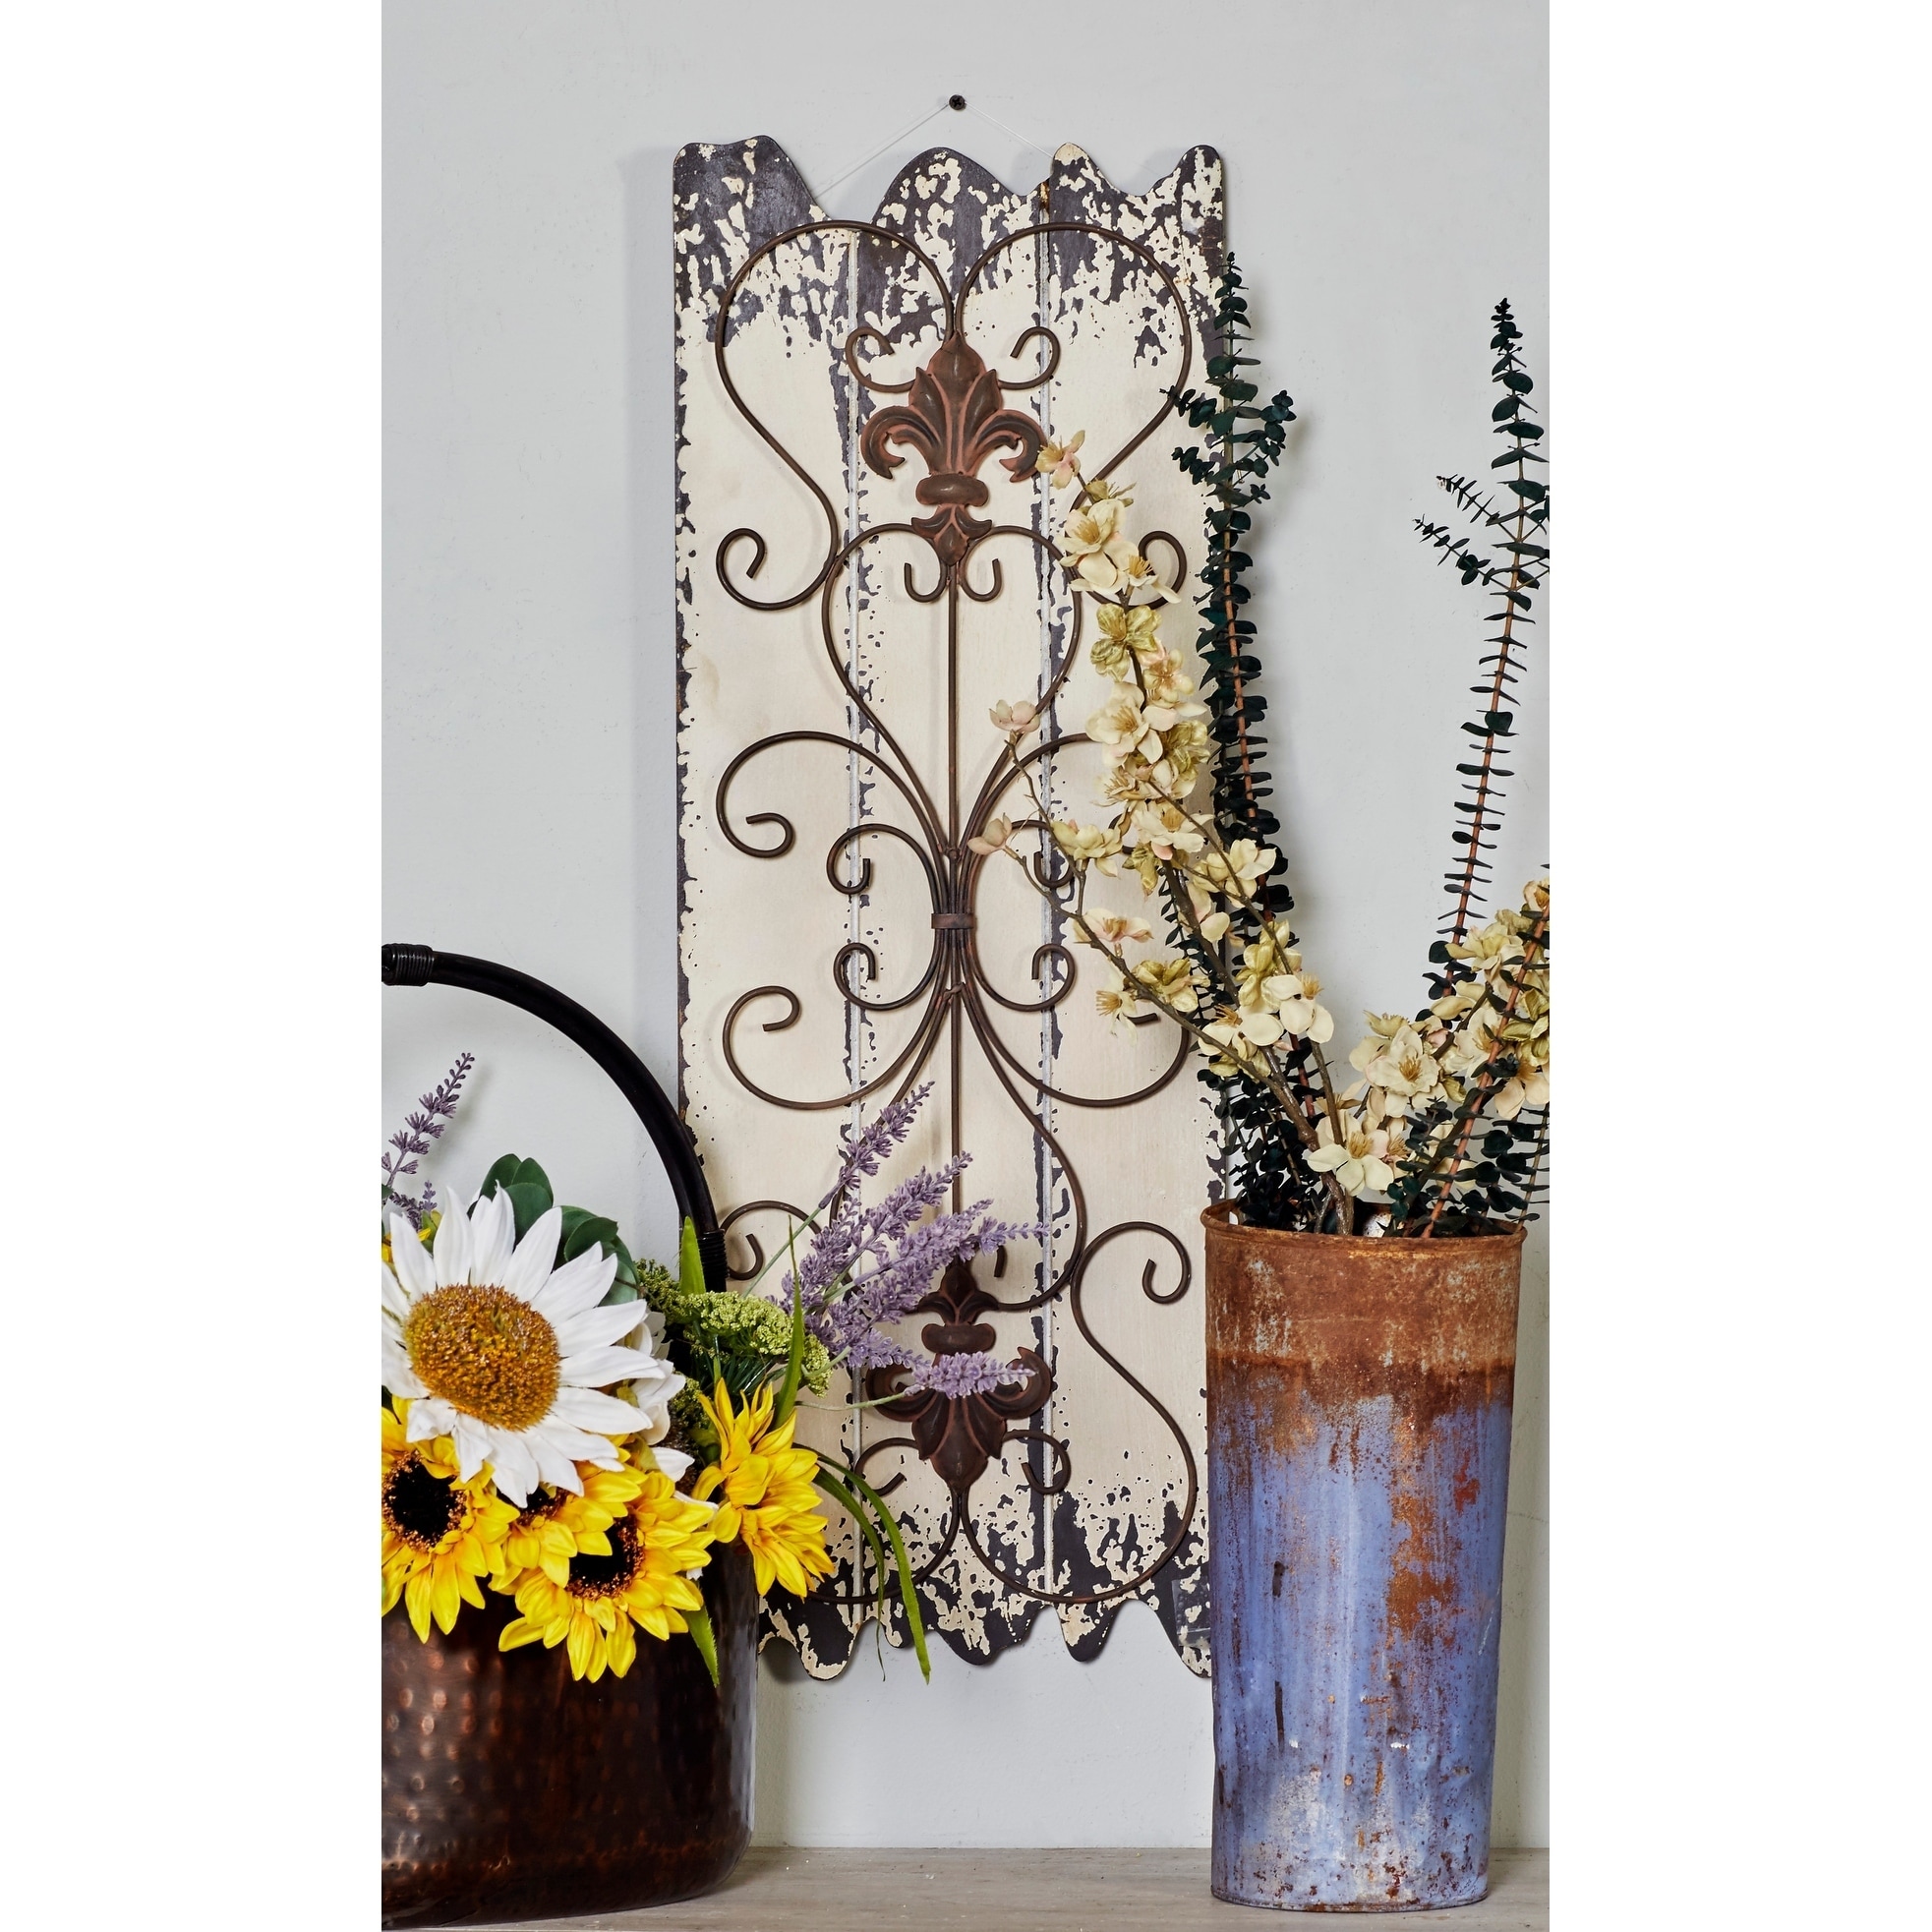 Distressed Wood And Metal Wall Decor Panel (set Of 2)